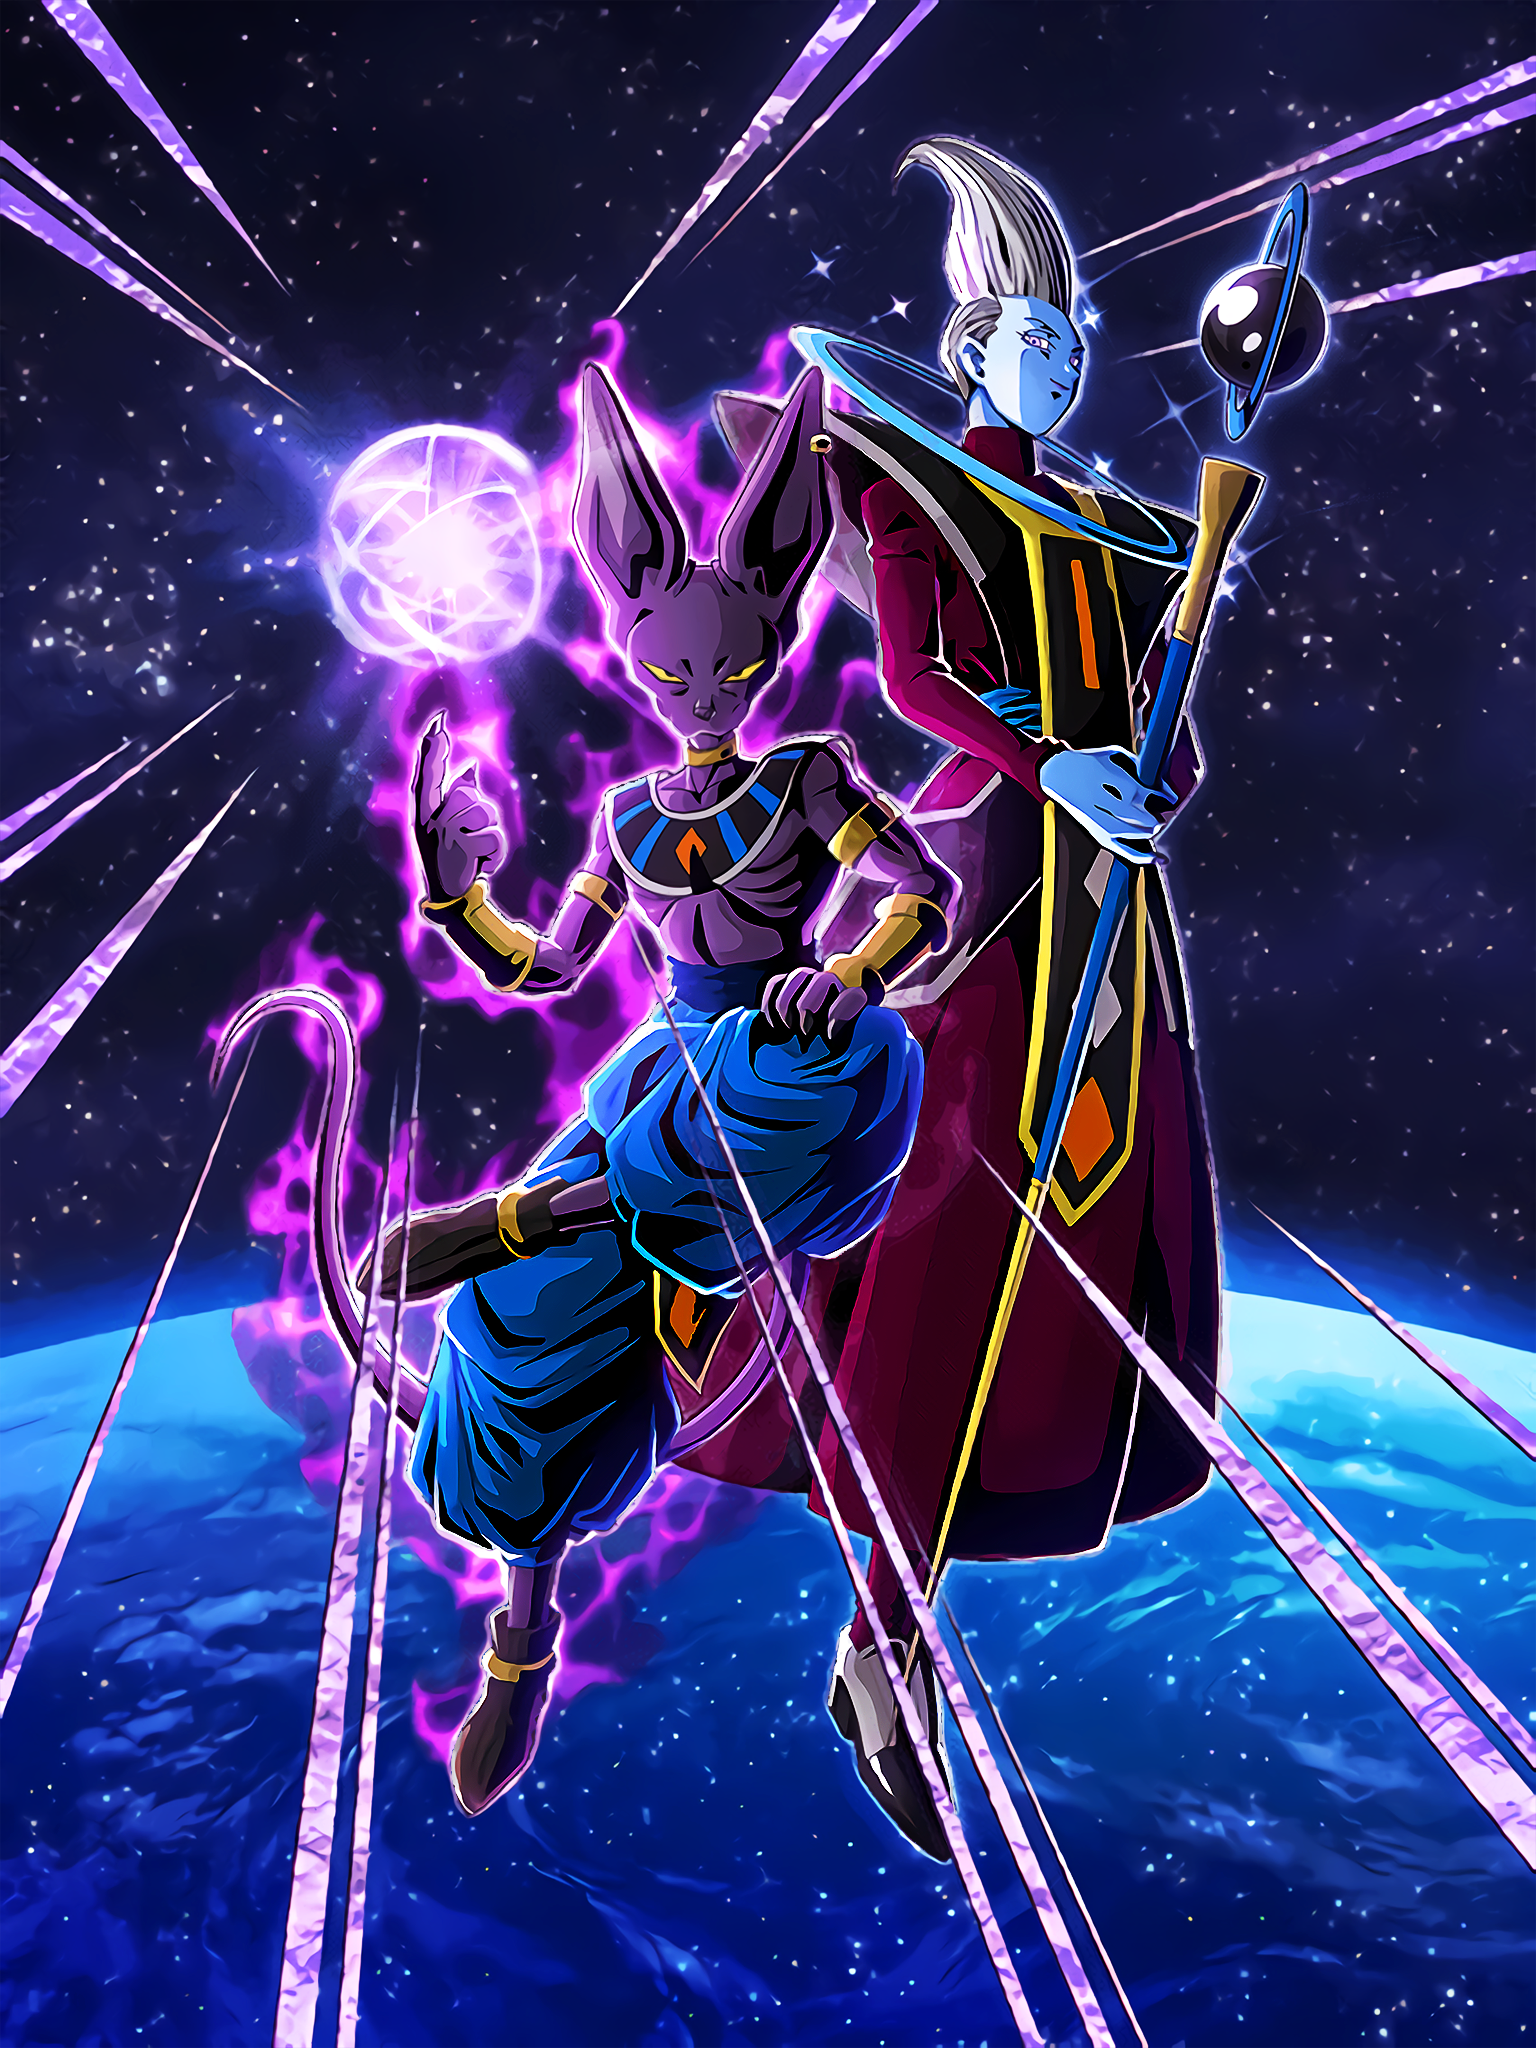 Although whis' grand powers aren't a secret to the fans, there ar...